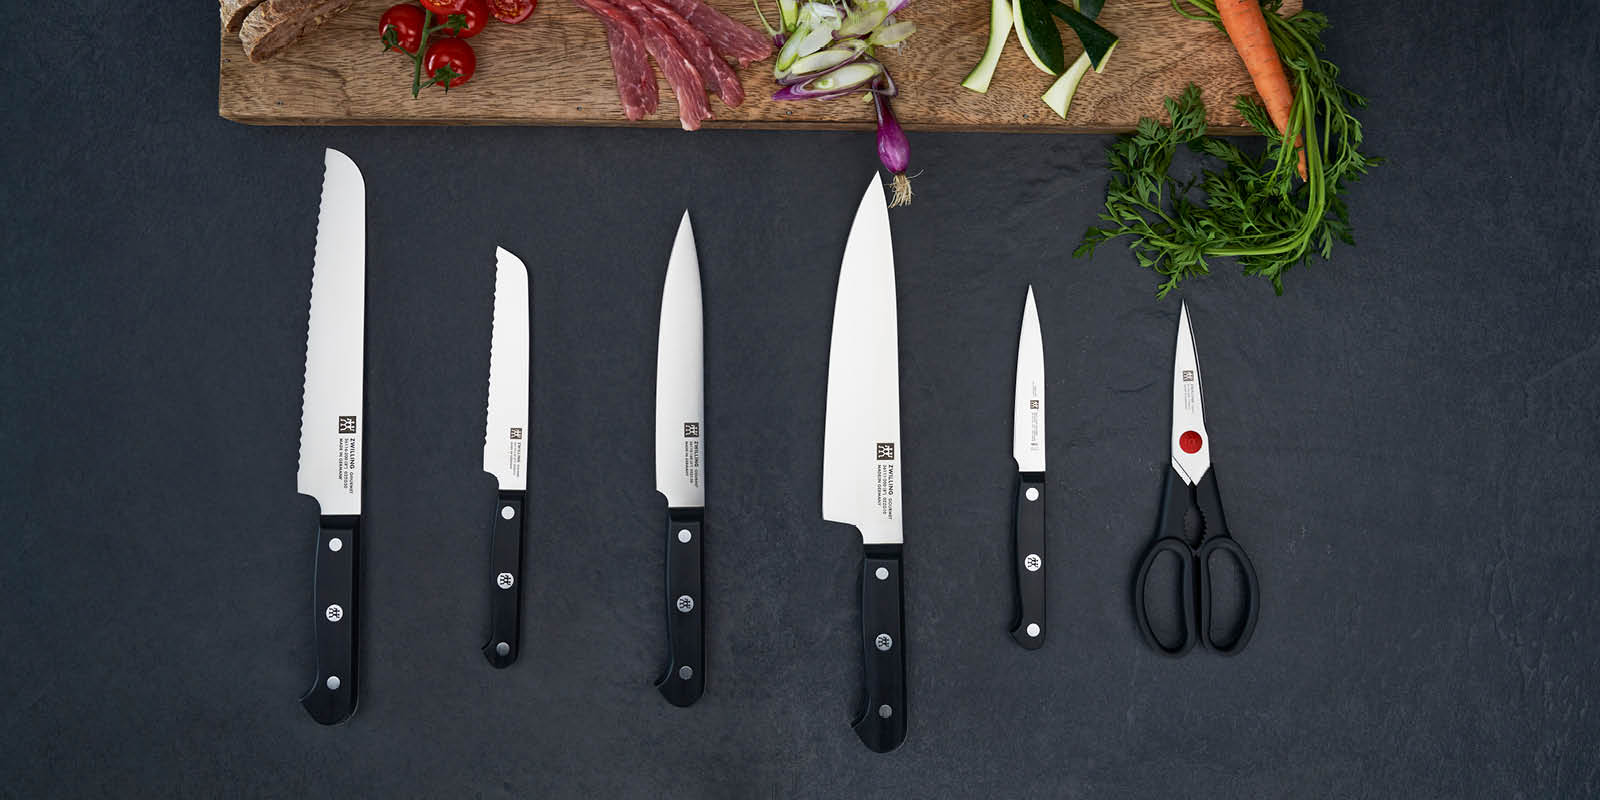 https://www.zwilling.com/on/demandware.static/-/Sites-zwilling-ca-Library/default/dw44c2553e/images/product-content/masonry-content/zwilling/cutlery/gourmet/36133-000-0_Lifestyle_Image_Series_OS_1200x600.jpg